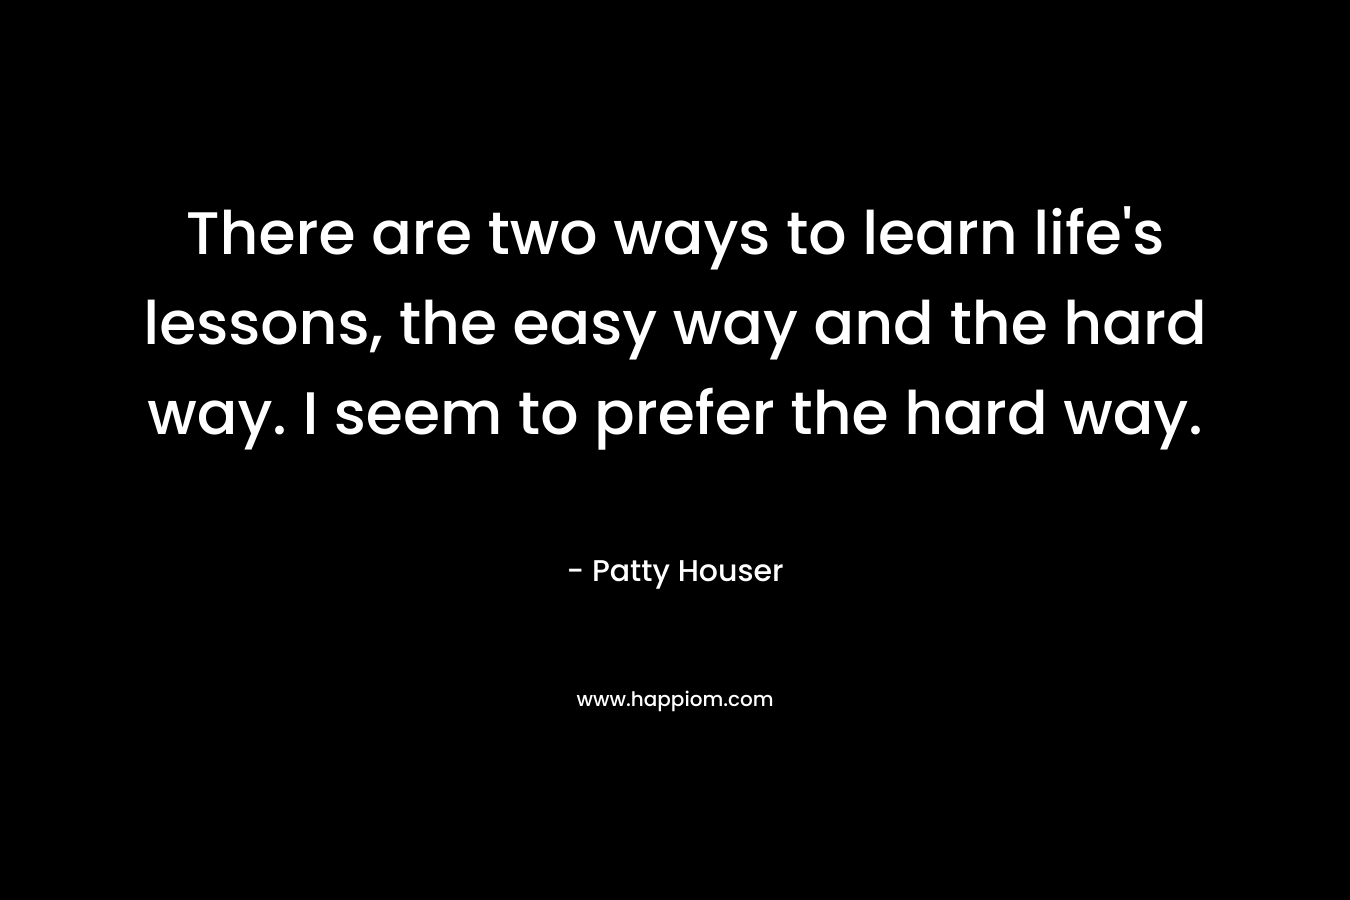 There are two ways to learn life's lessons, the easy way and the hard way. I seem to prefer the hard way.